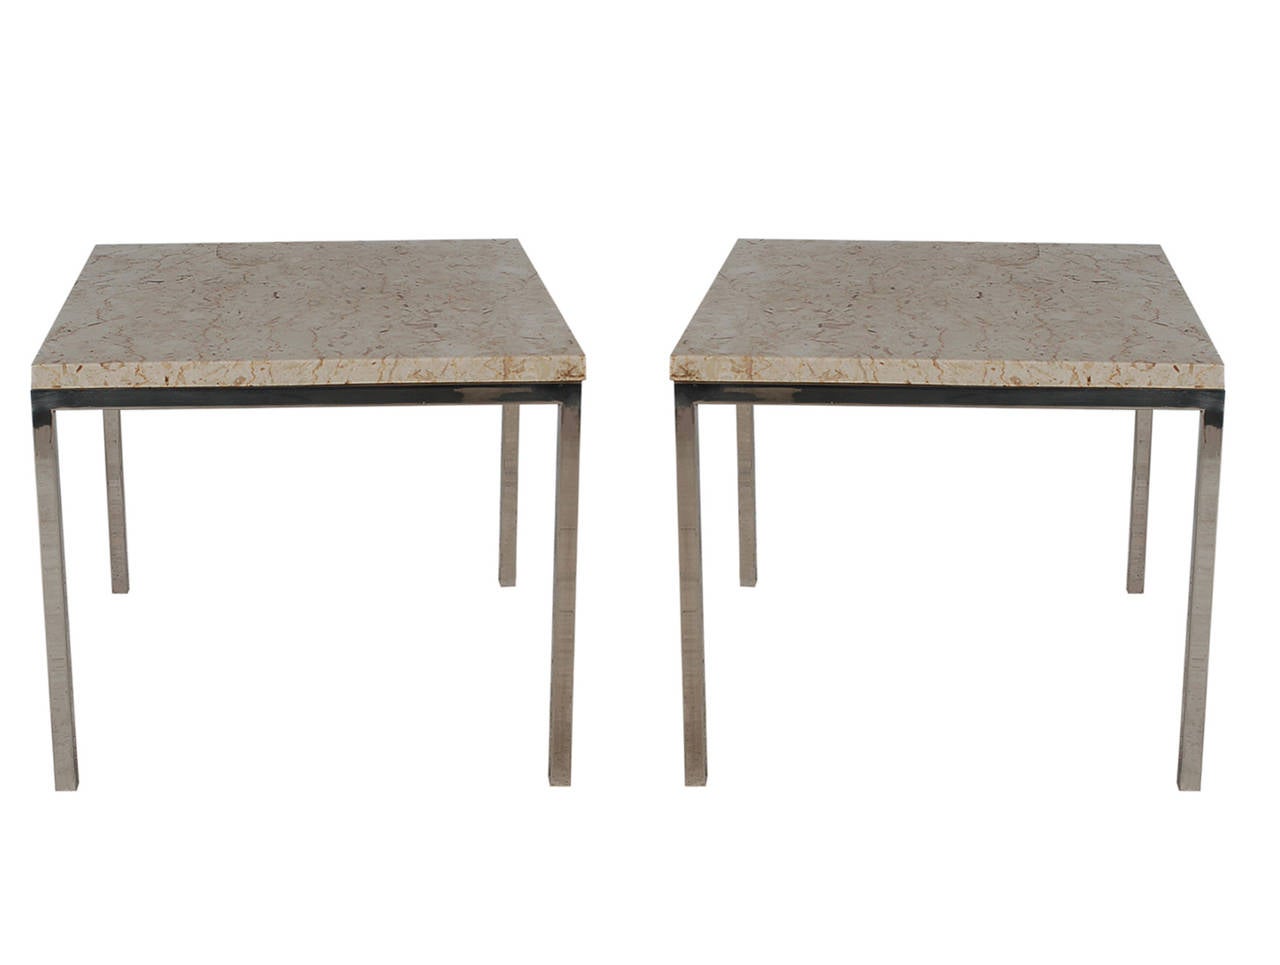 A simply gorgeous matching pair of modern Italian end tables. They feature chrome bases topped with Dolcetto Perlato Italian marble.